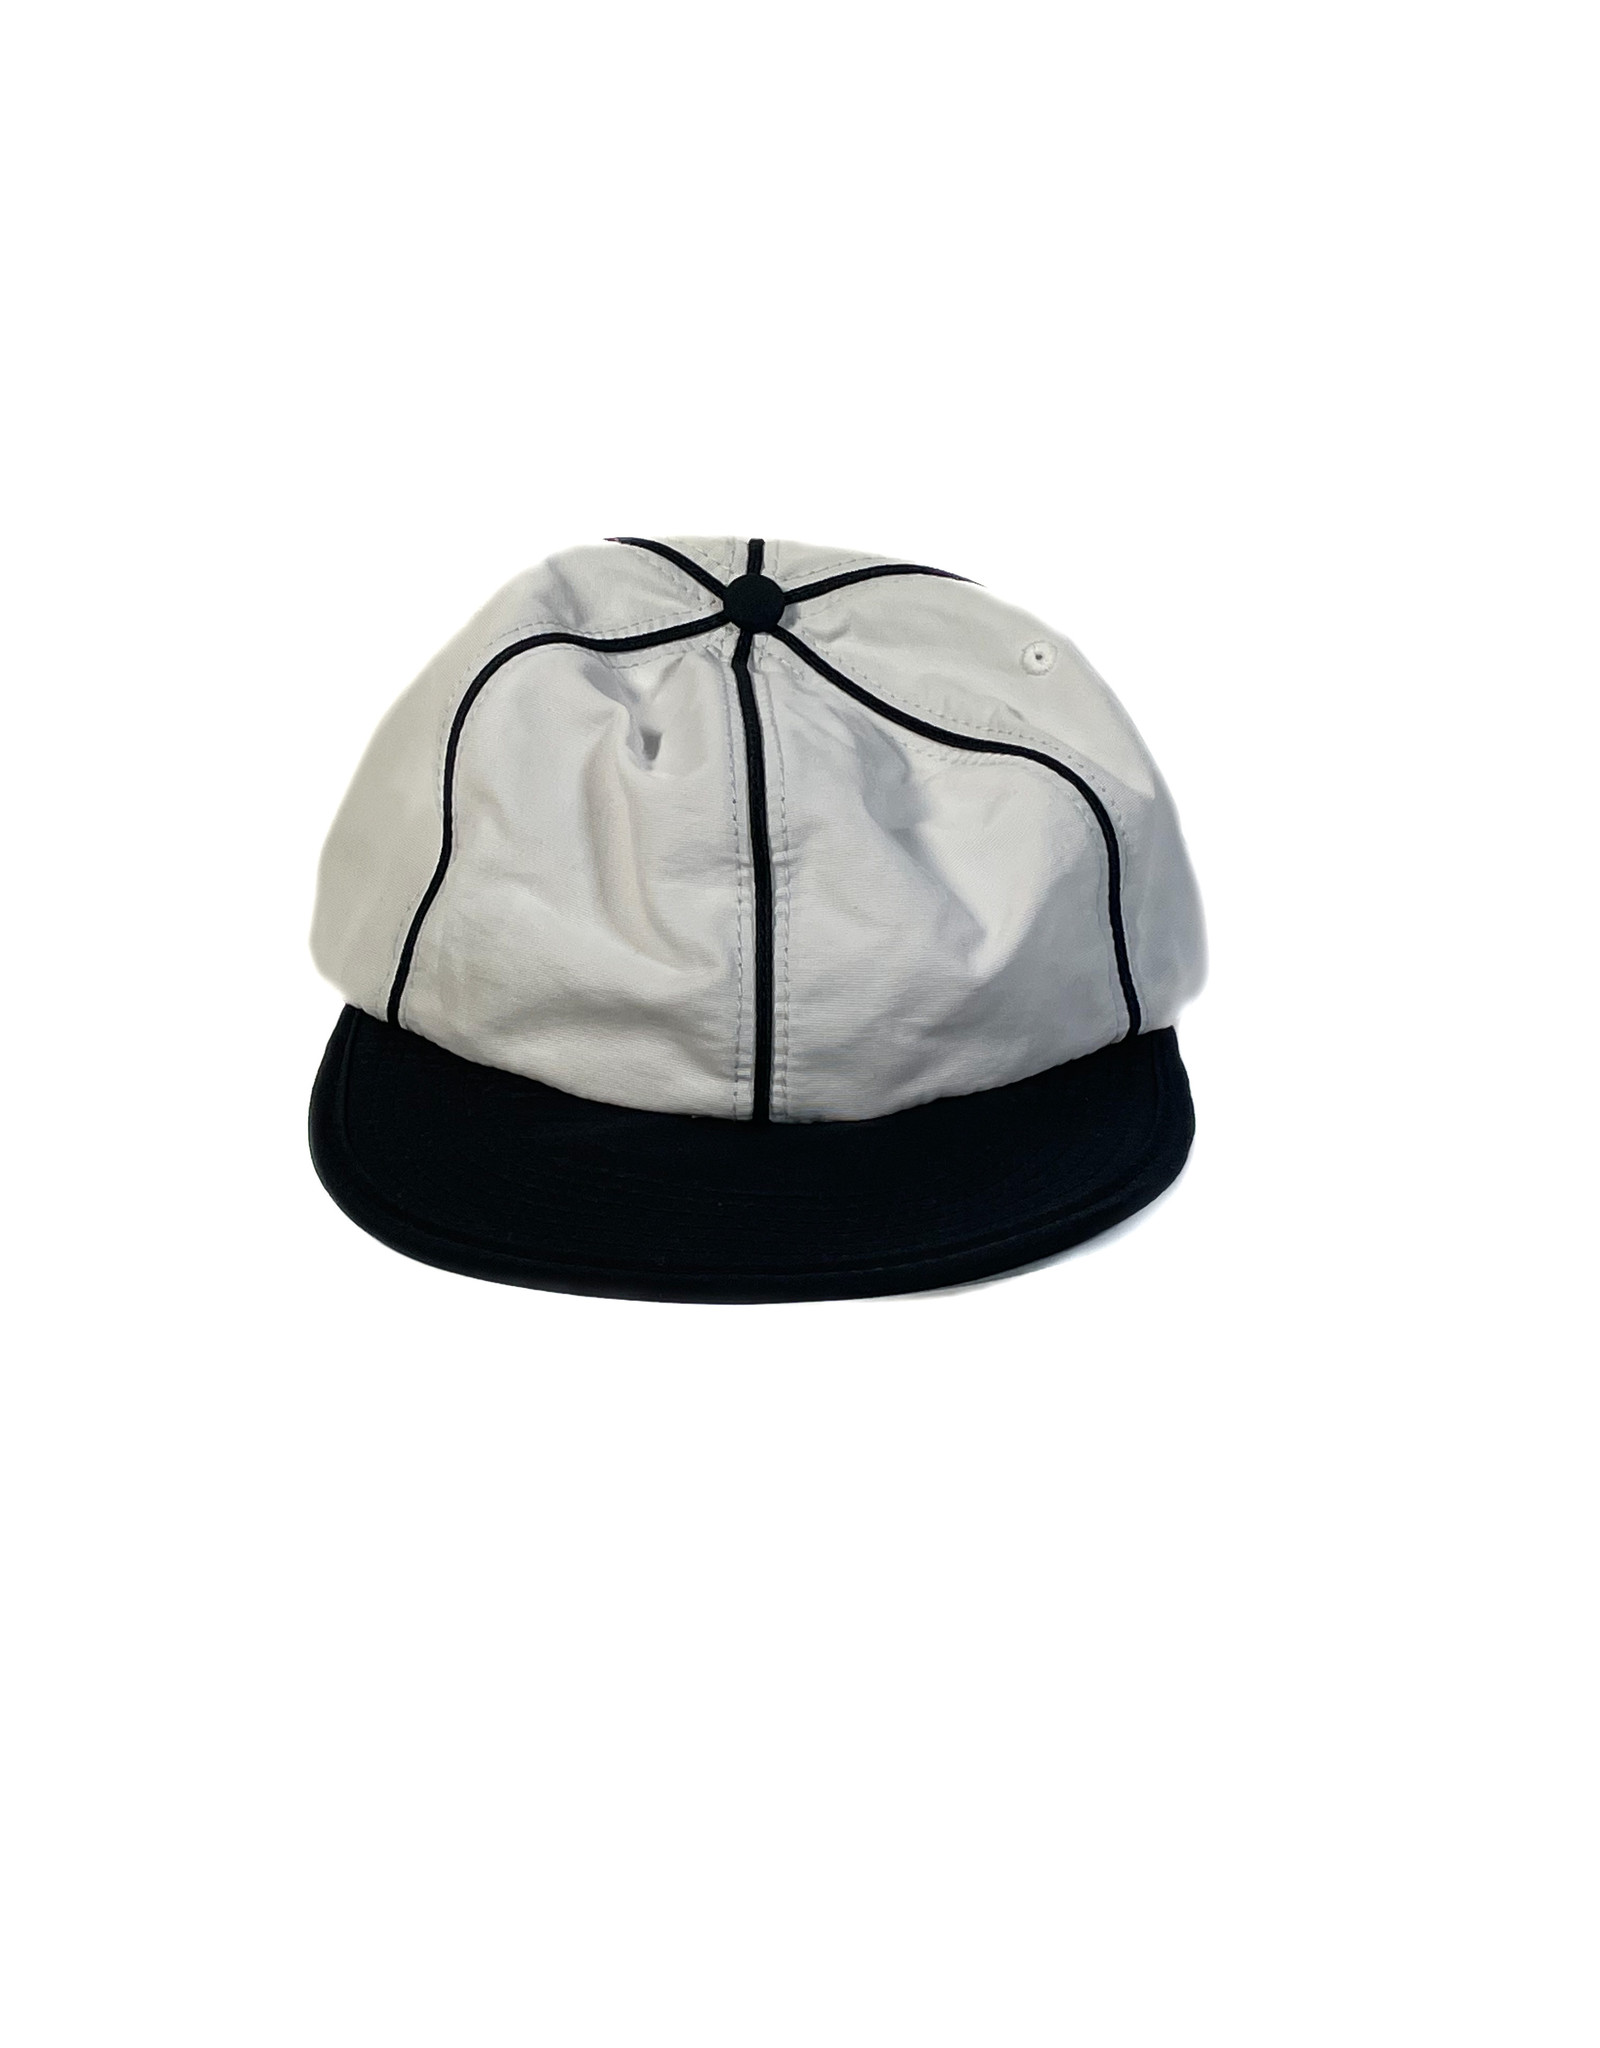 KINGSWELL KINGSWELL TWO TONE CRUSHABLE NYLON HAT